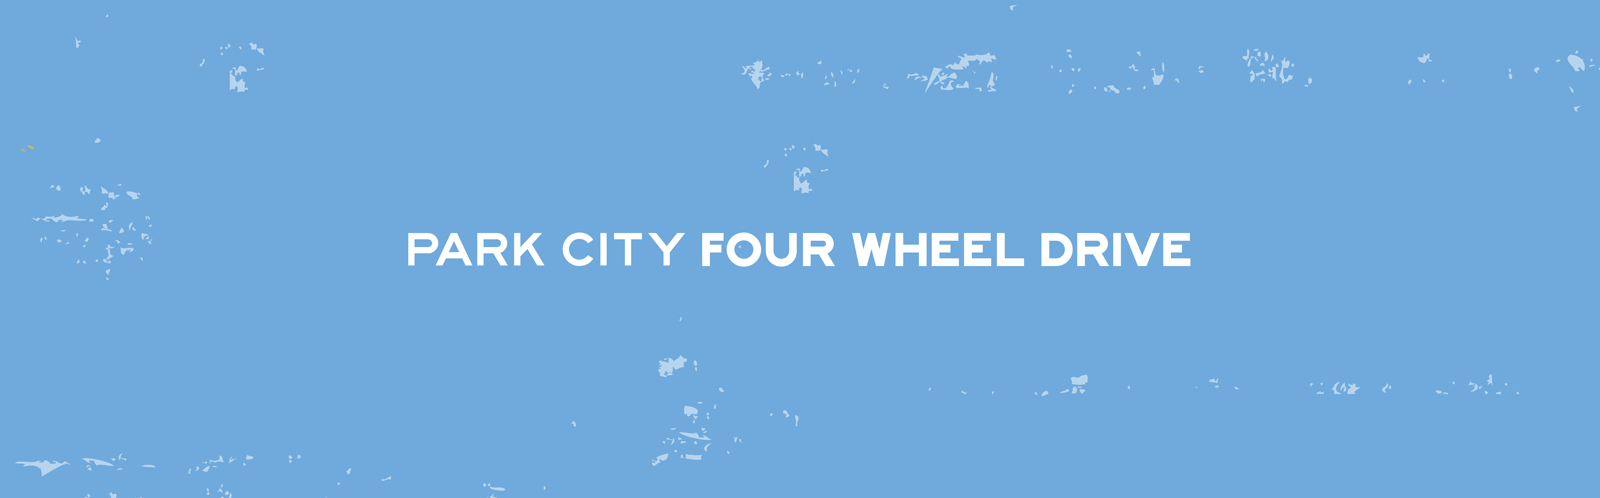 park-city-four-wheel-drive-name.png